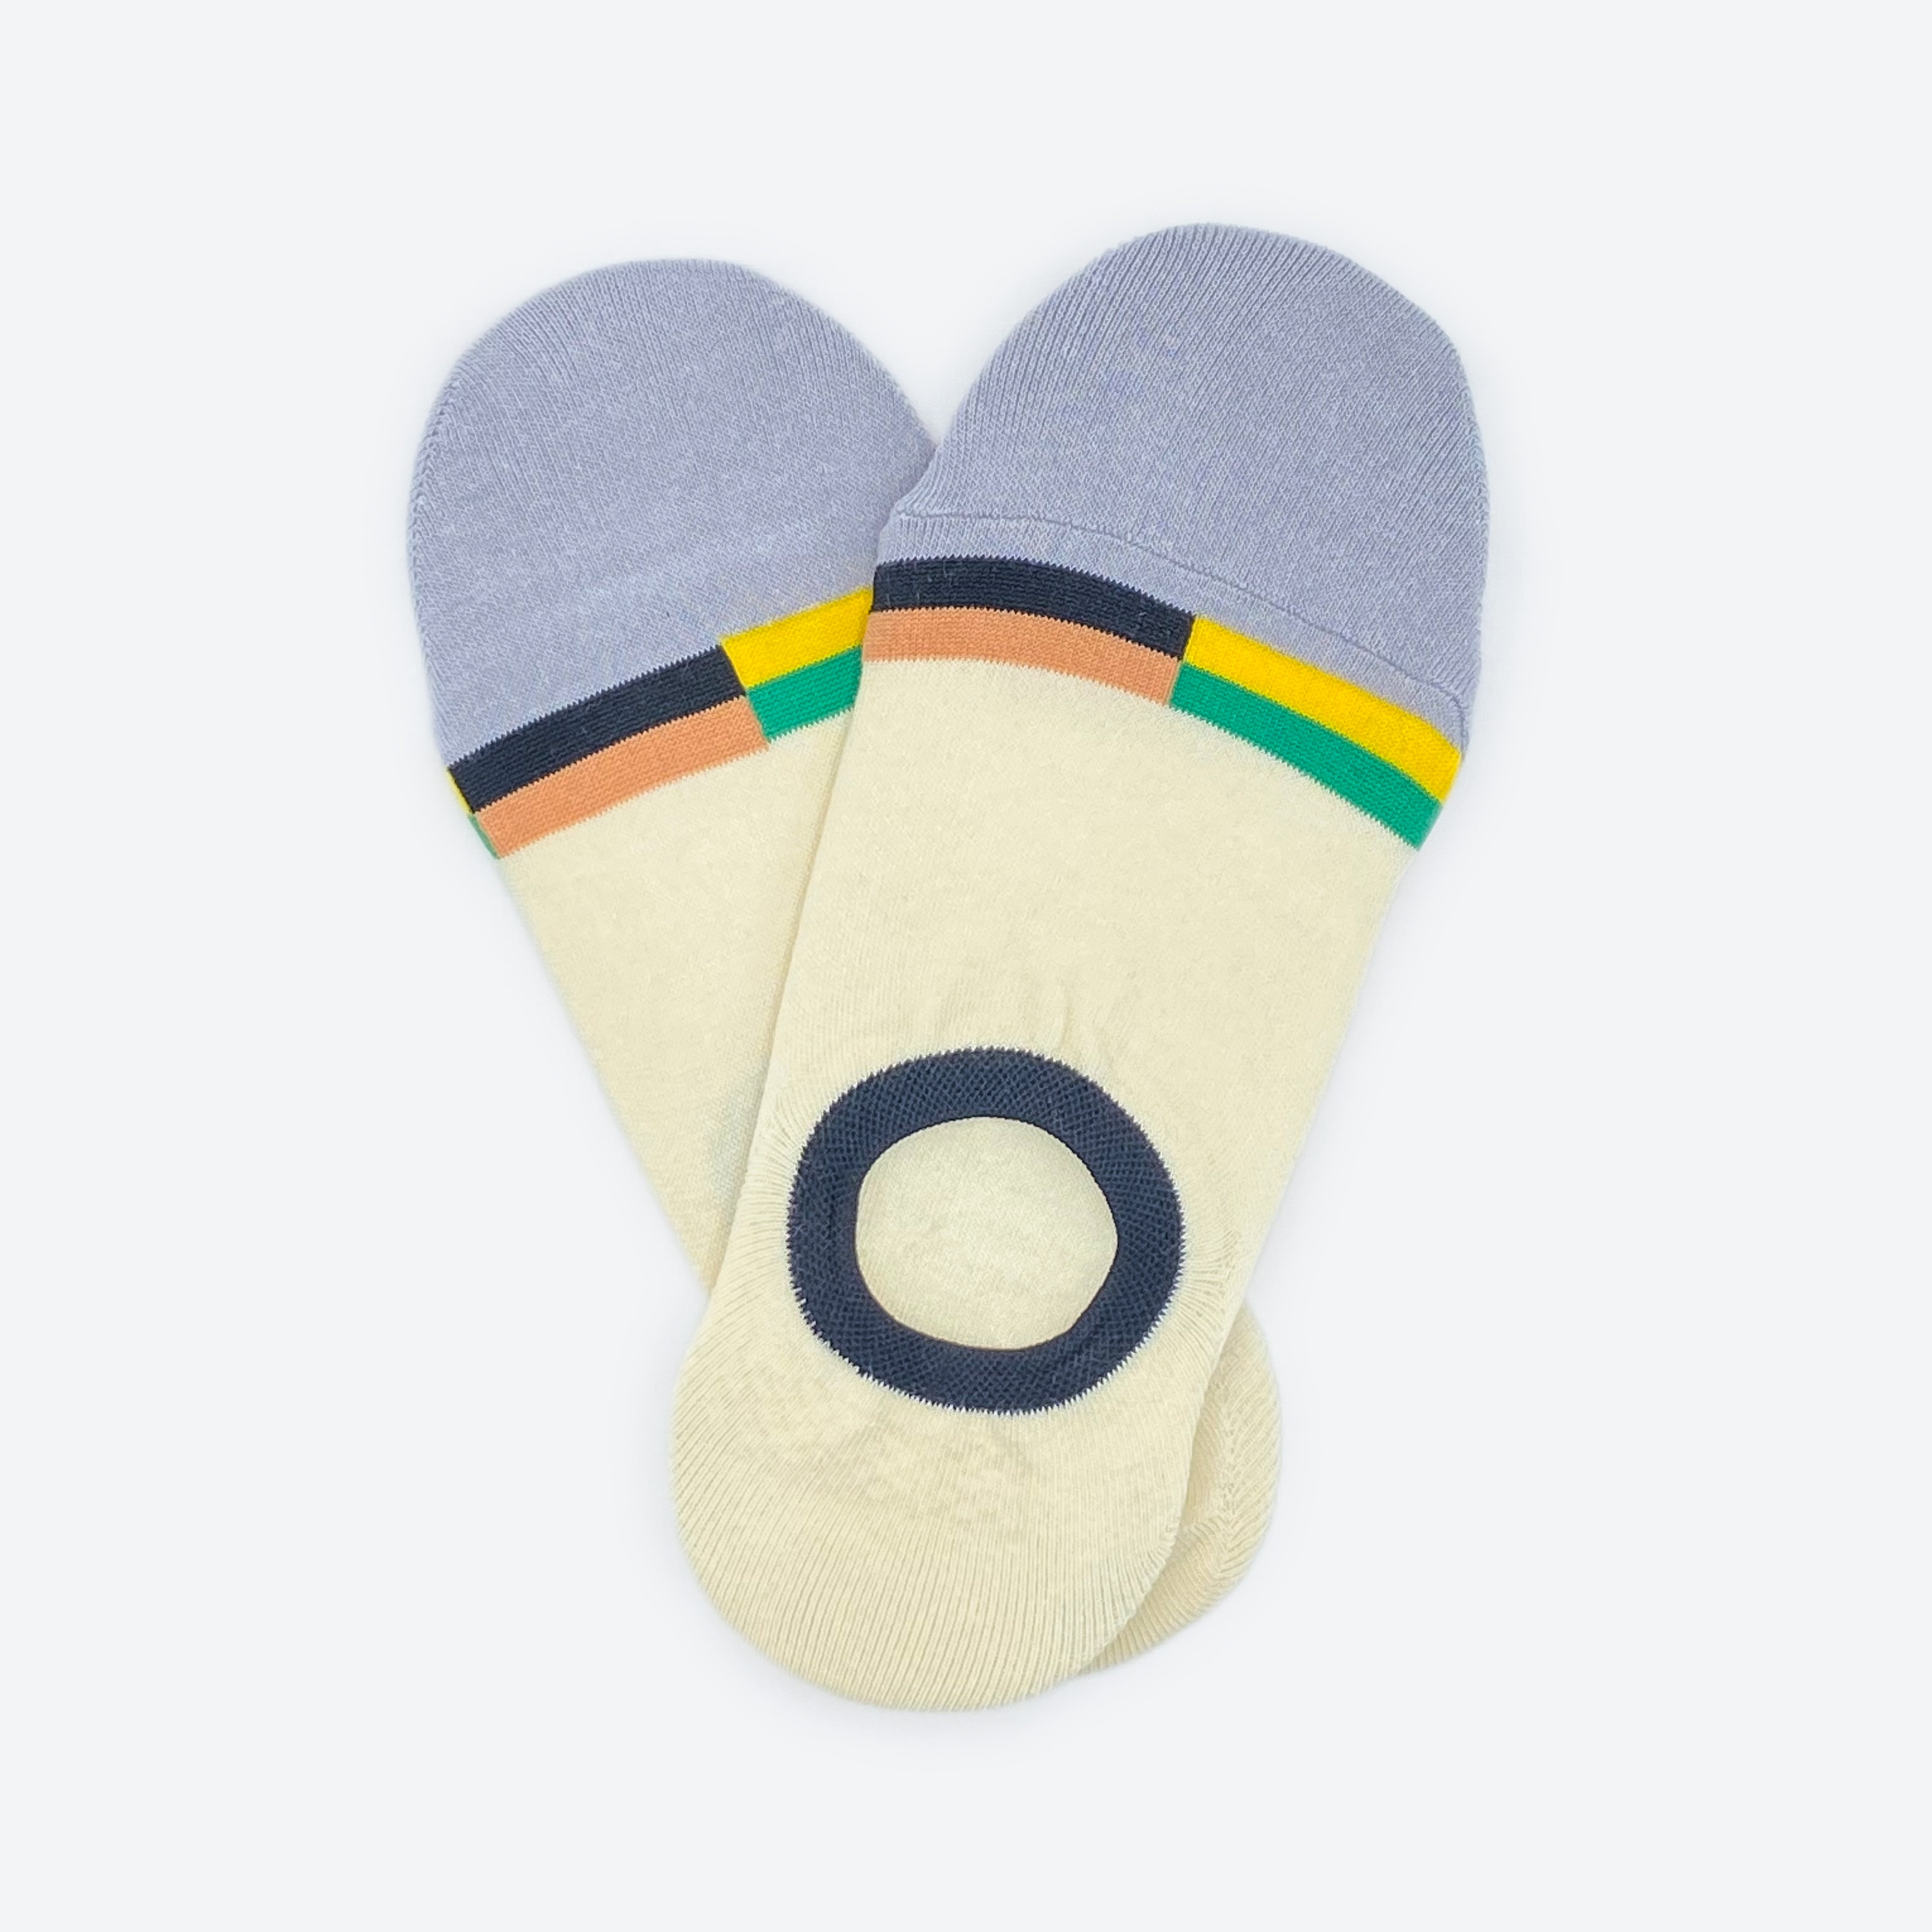 Hooray Sock Co. Marina No Show Socks. Lightweight, minimal, perfect for hot weather. Heel grips for secure fit. Size: Large (US men’s 8-12), Small (US women&#39;s 4-10)